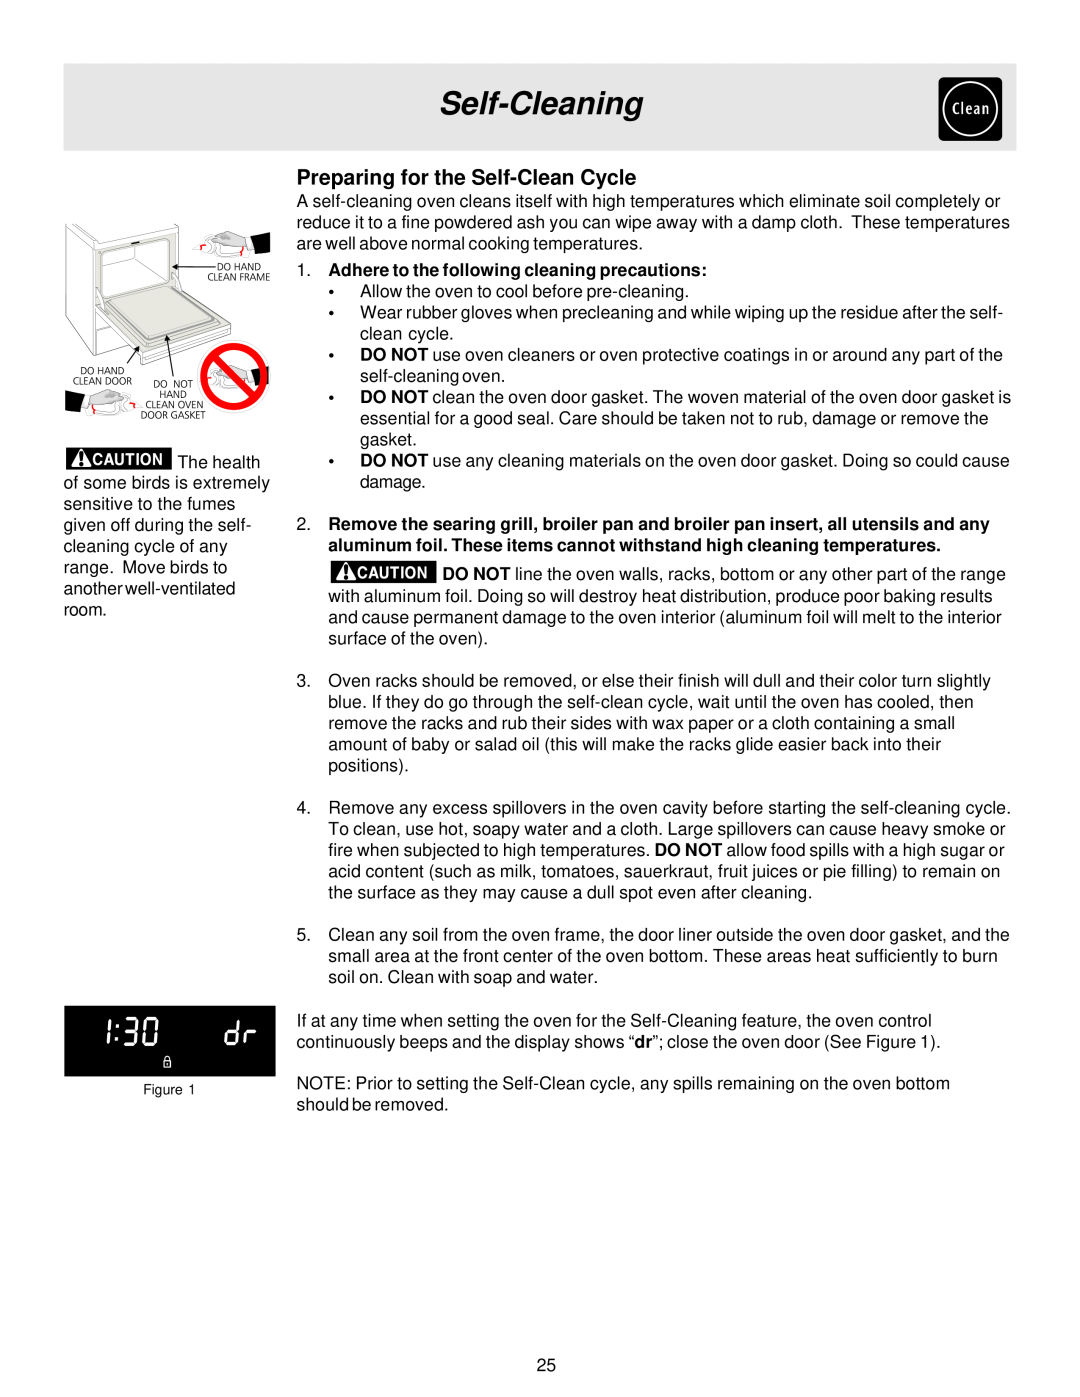 Frigidaire ES400 manual Self-Cleaning, Preparing for the Self-Clean Cycle, Adhere to the following cleaning precautions 